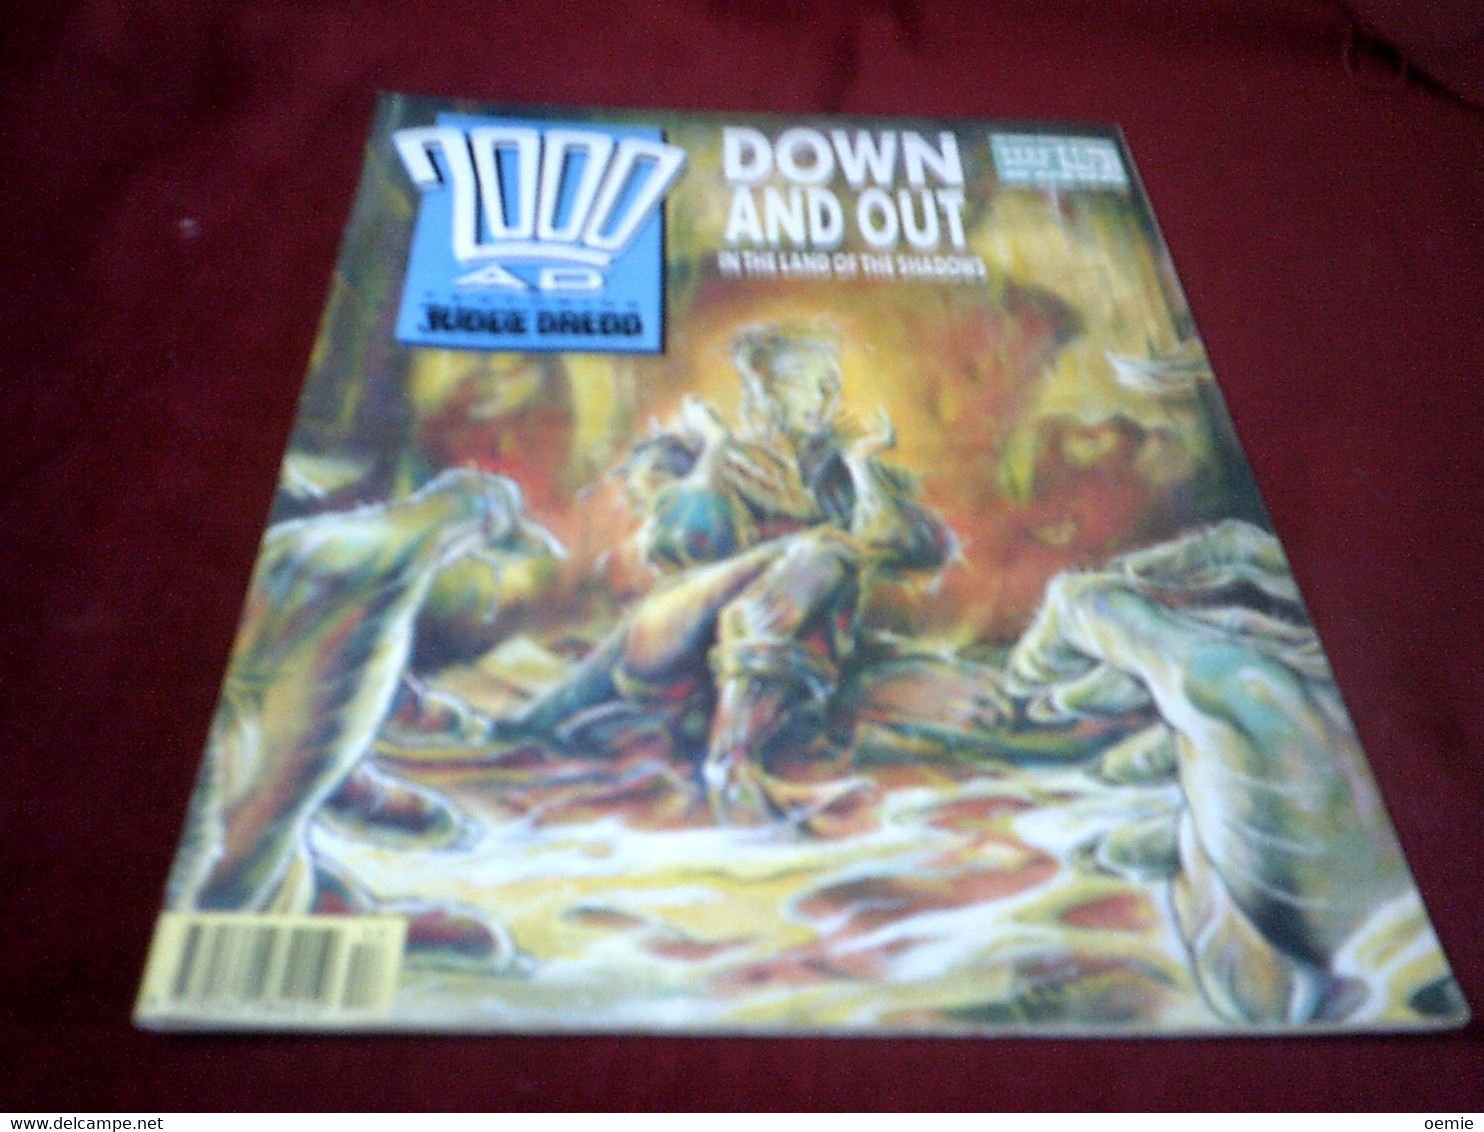 2000 AD   / JUDGE DREDD  DOWN AND OUT   28 APR 1990 - Other Publishers